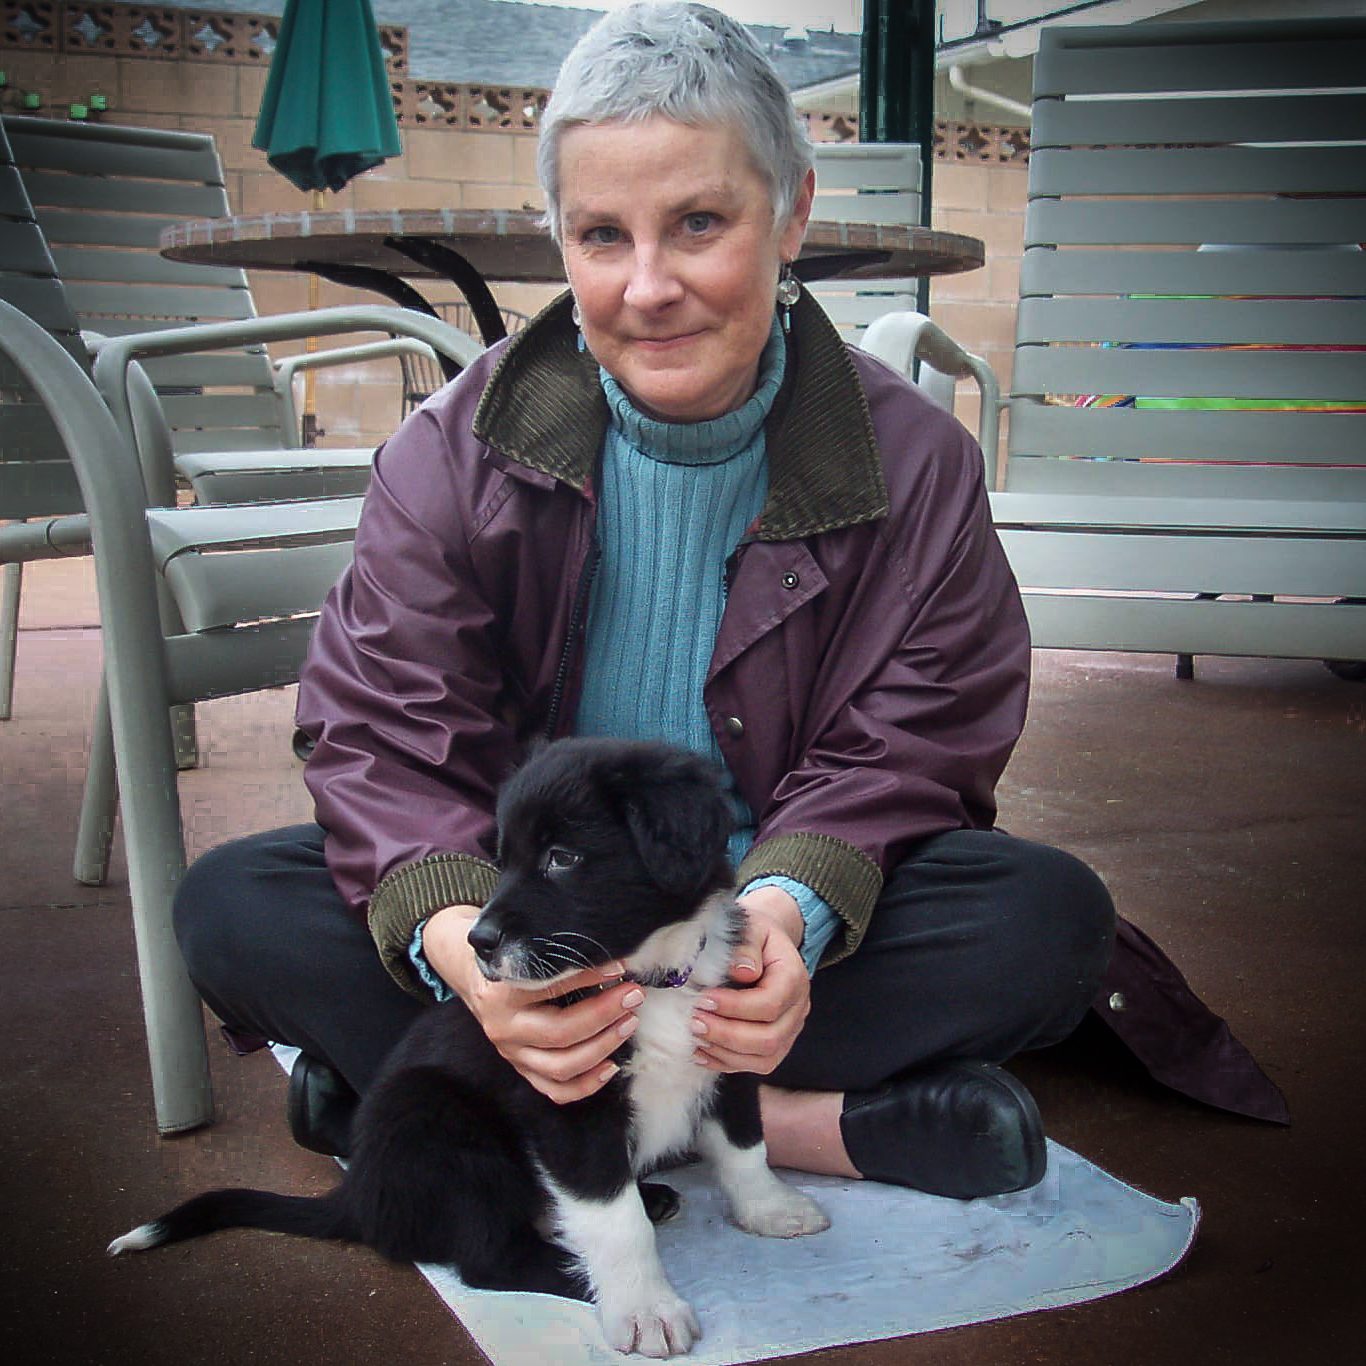 Border collie puppy and woman with grey hair